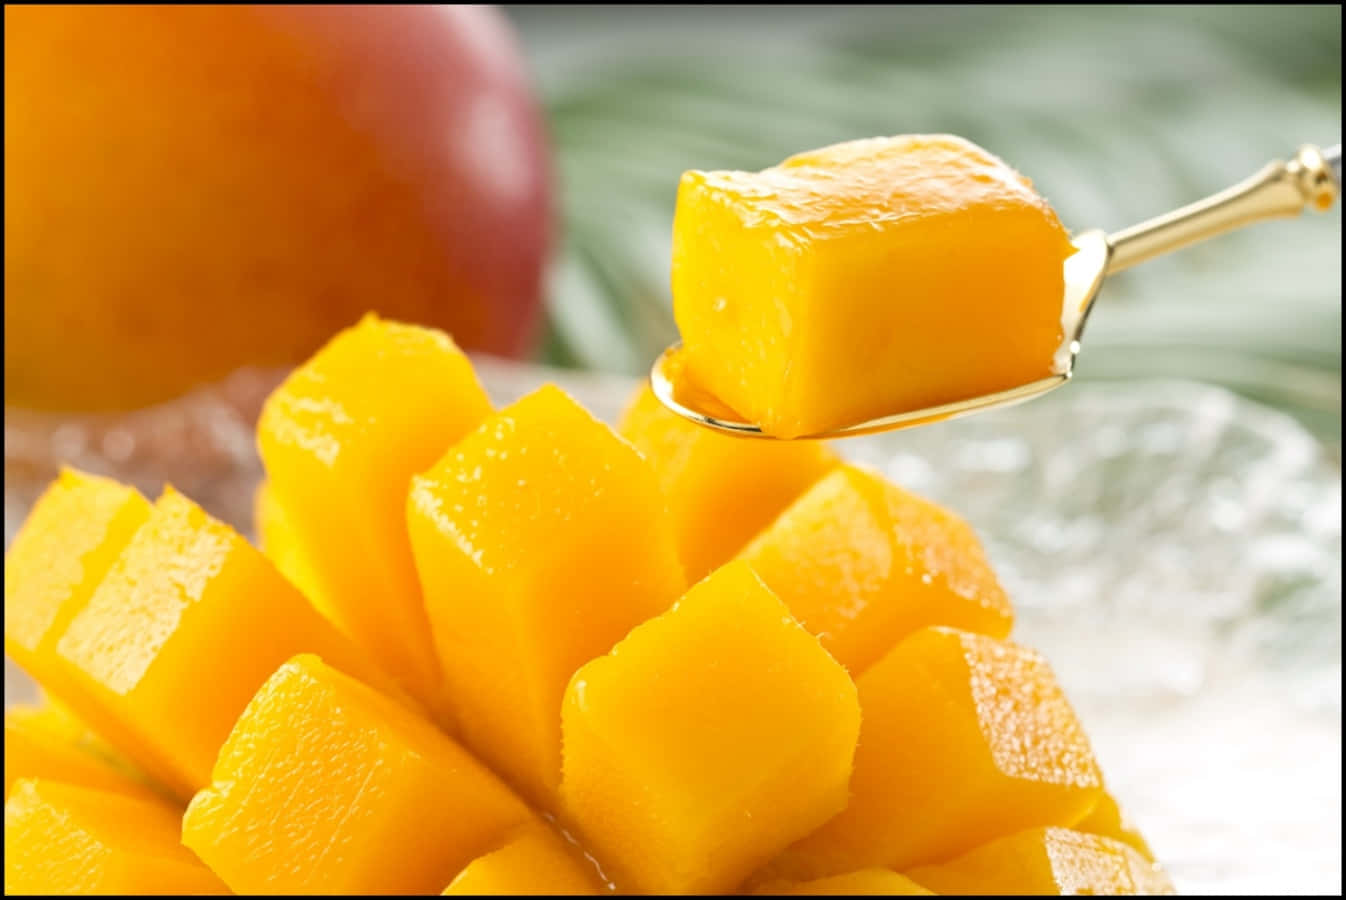 Enjoy delicious, juicy mangoes straight from nature.